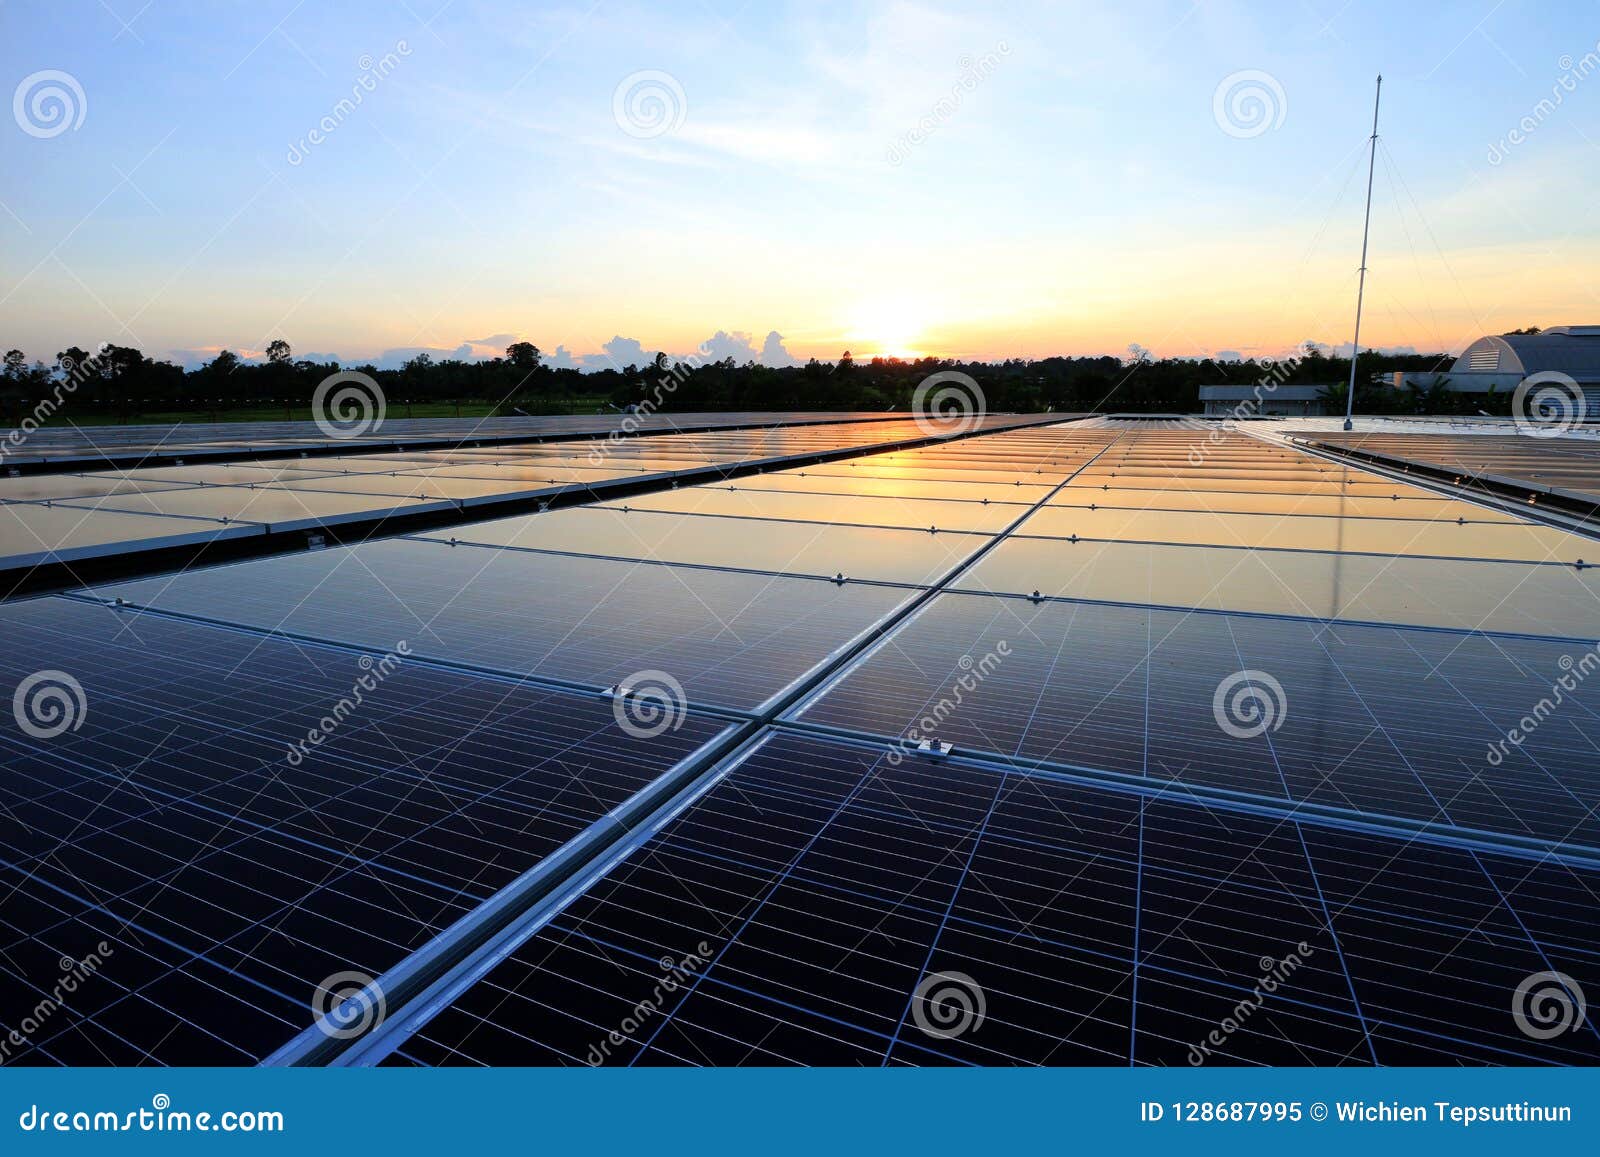 solar pv rooftop beautiful sunset sky